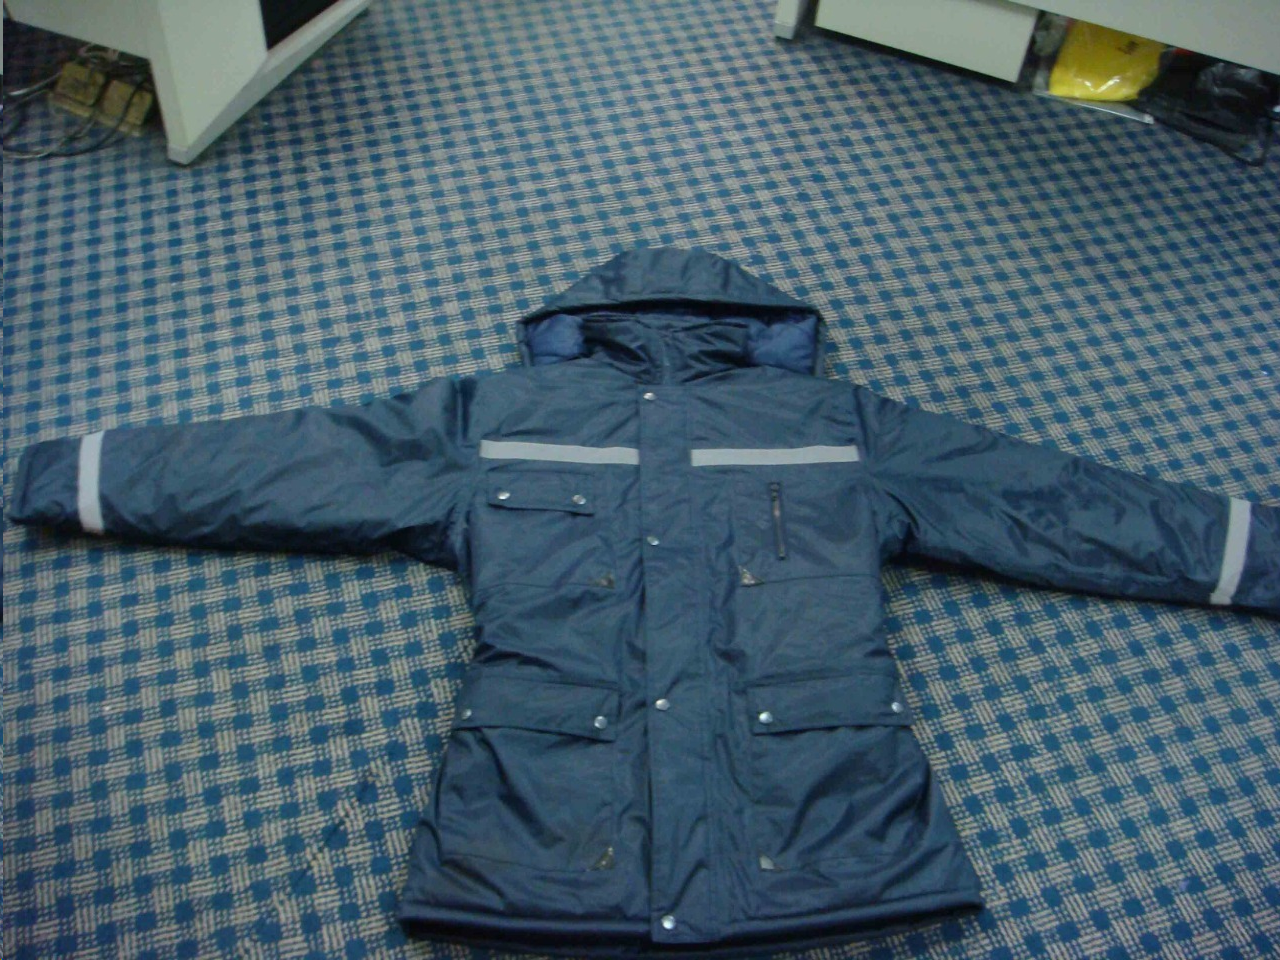 Distributor of Winter Jacket With Reflective Strips in UAE